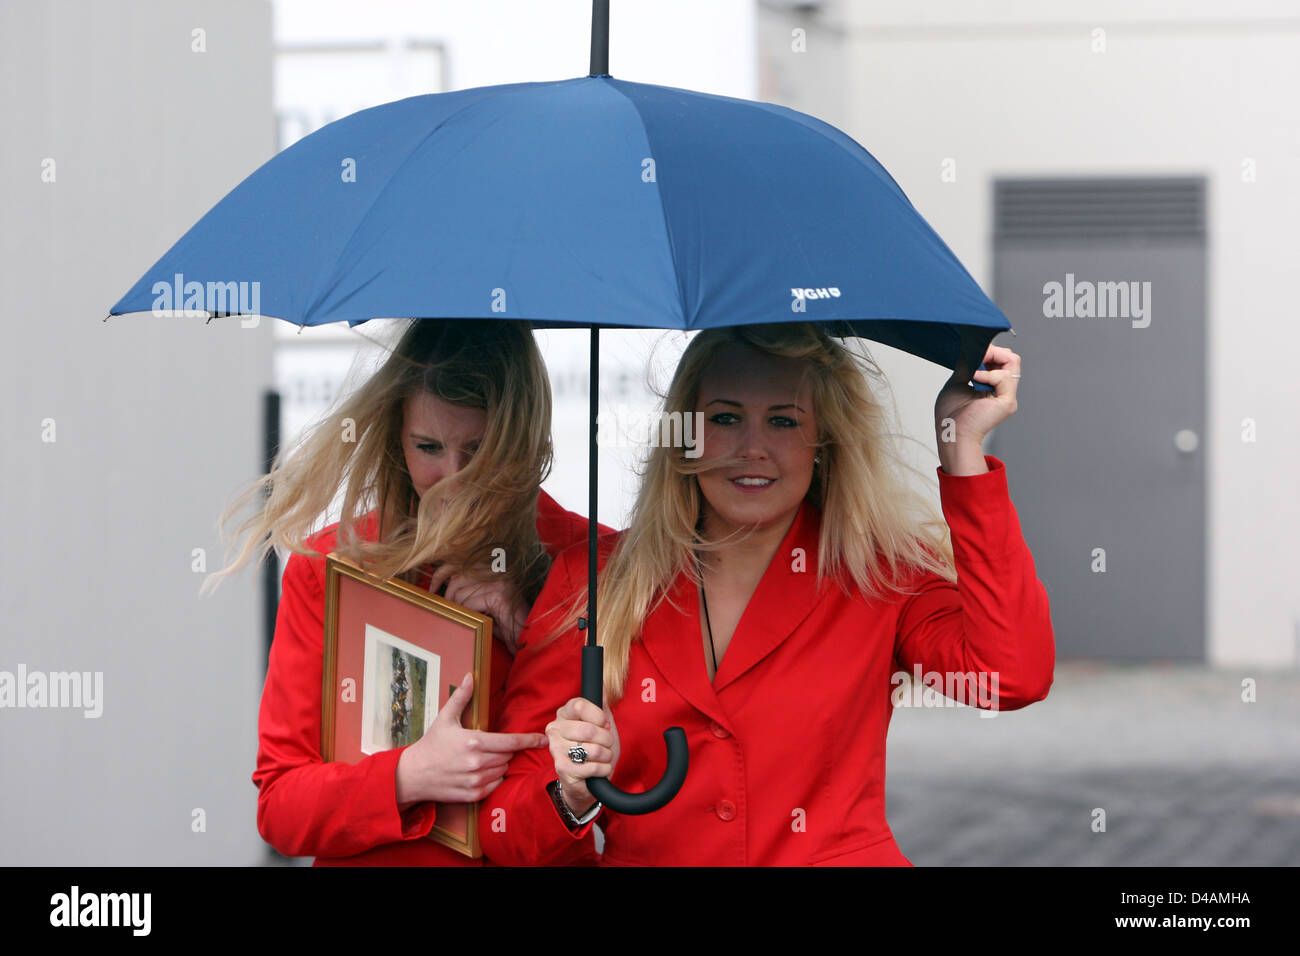 Hannover, Germany, women run together under an umbrella Stock Photo